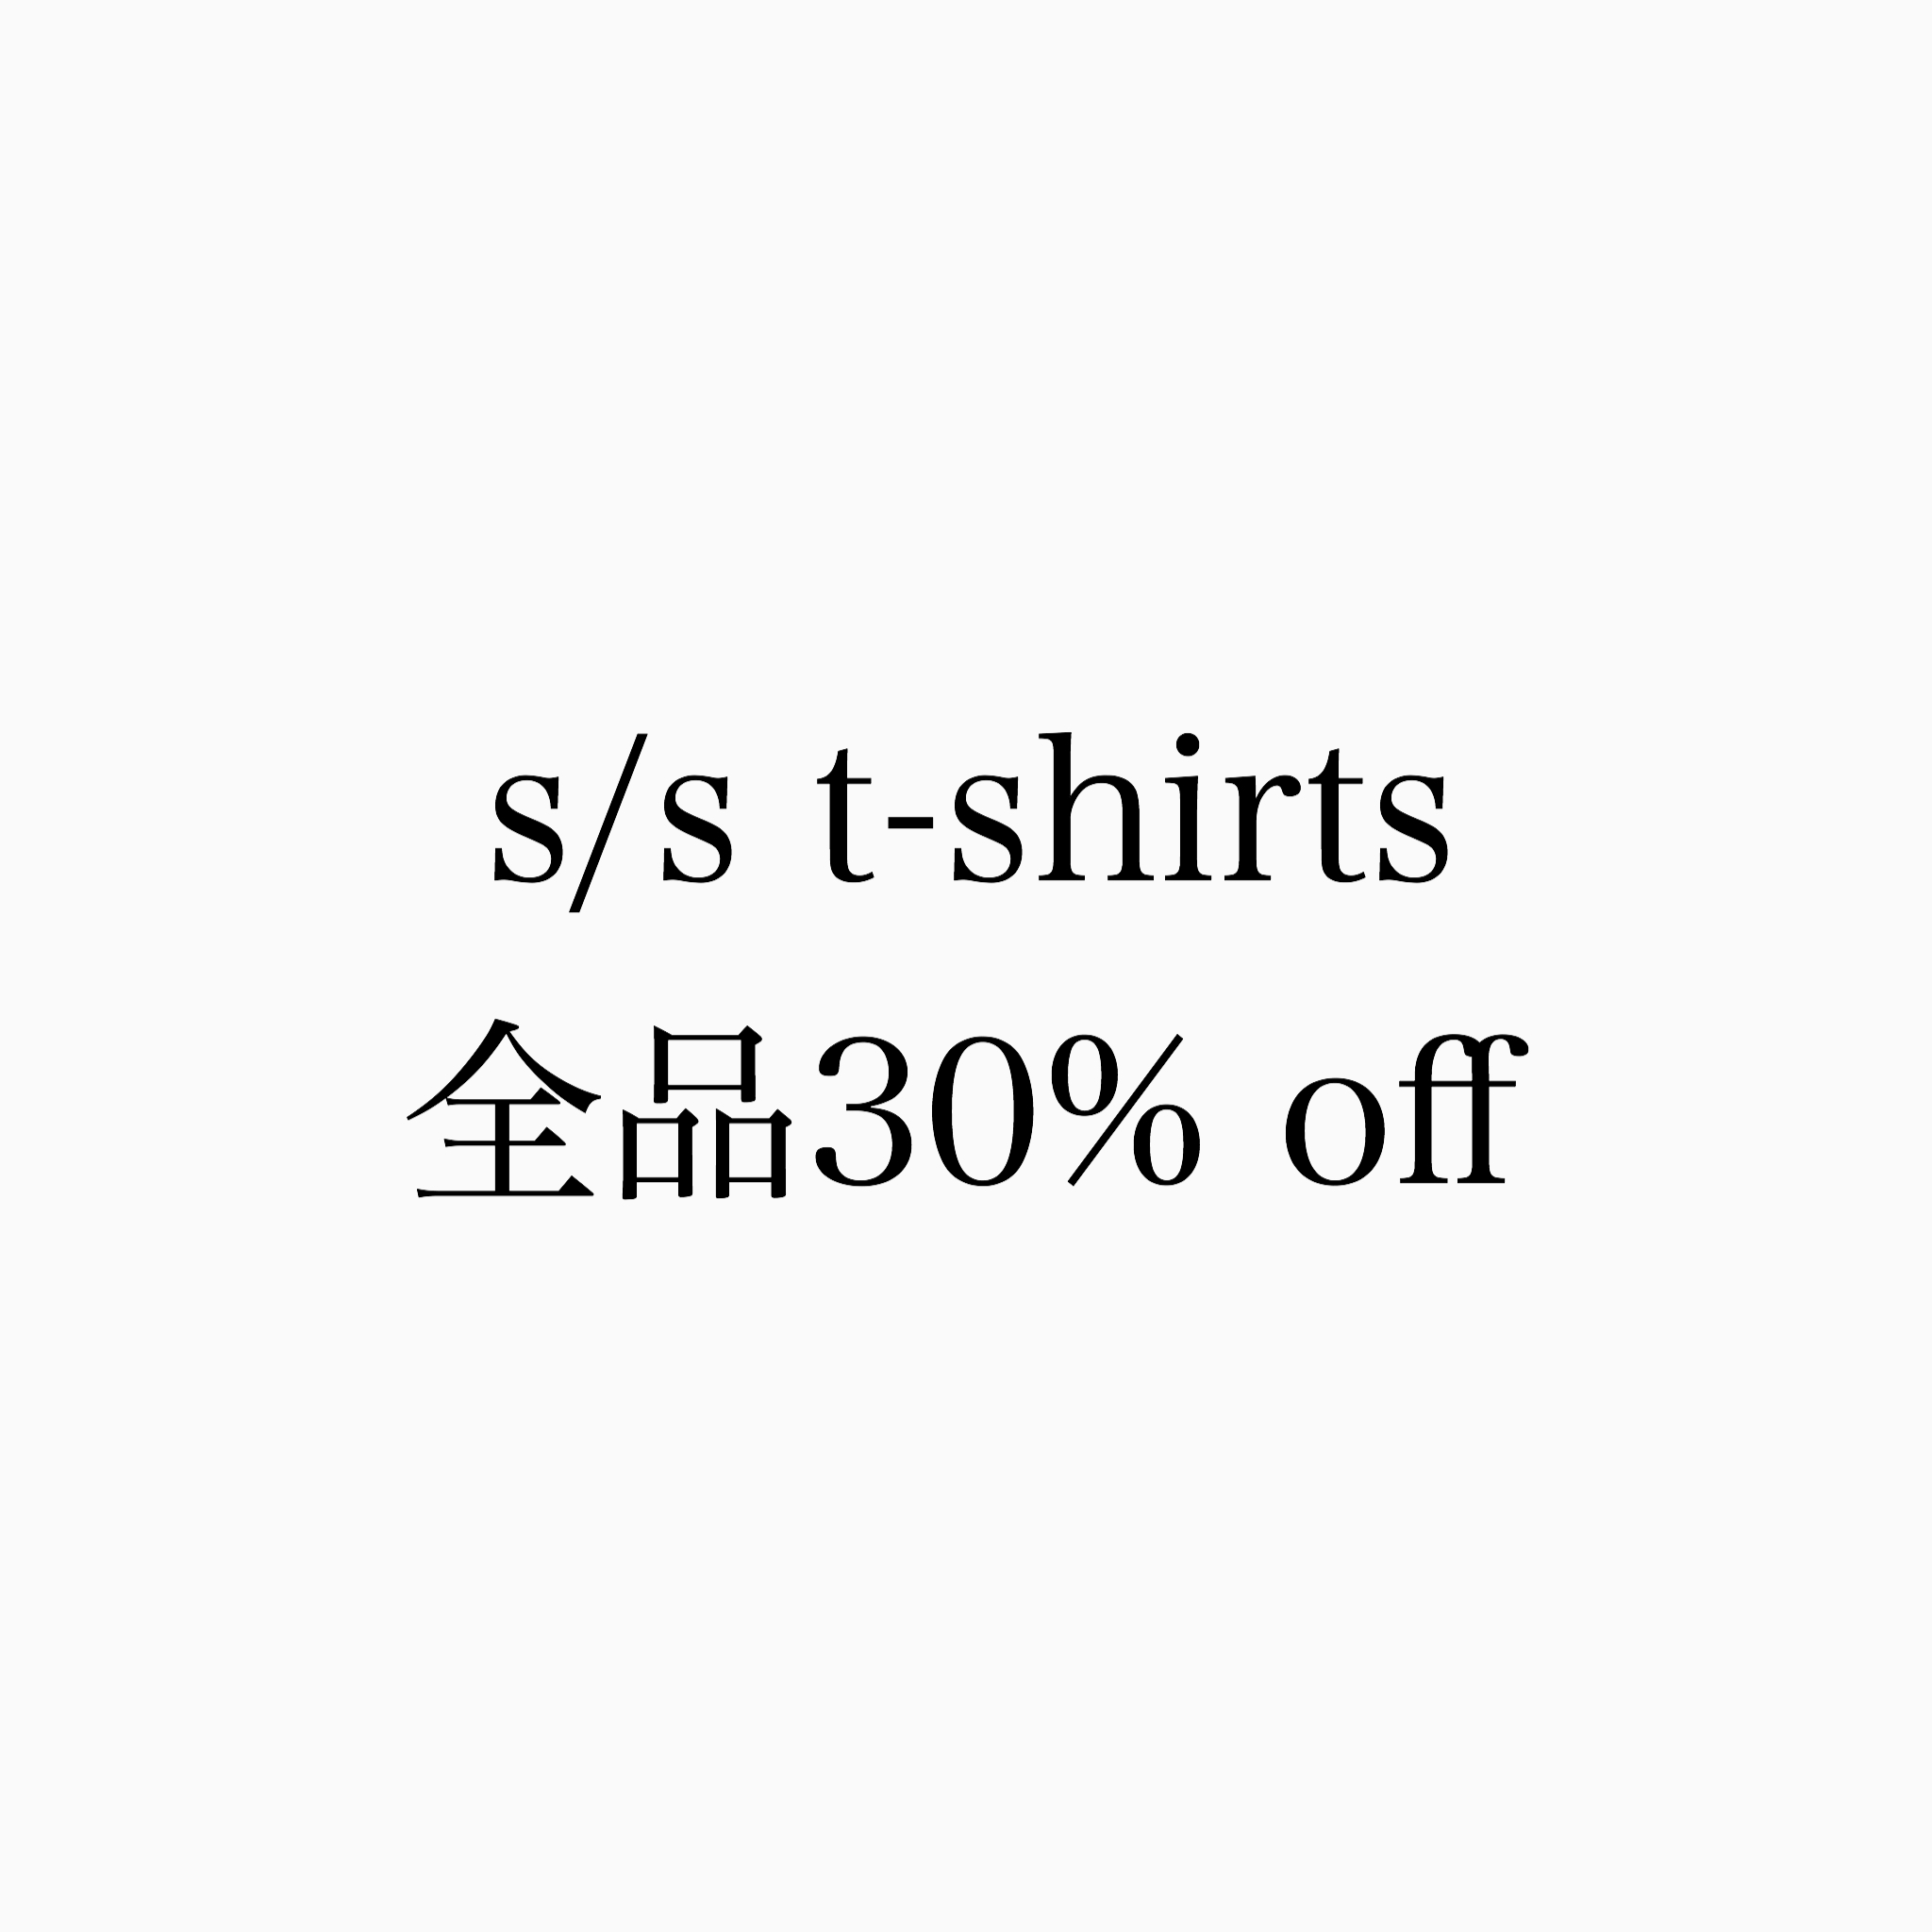 s/s t-shirts 30% off